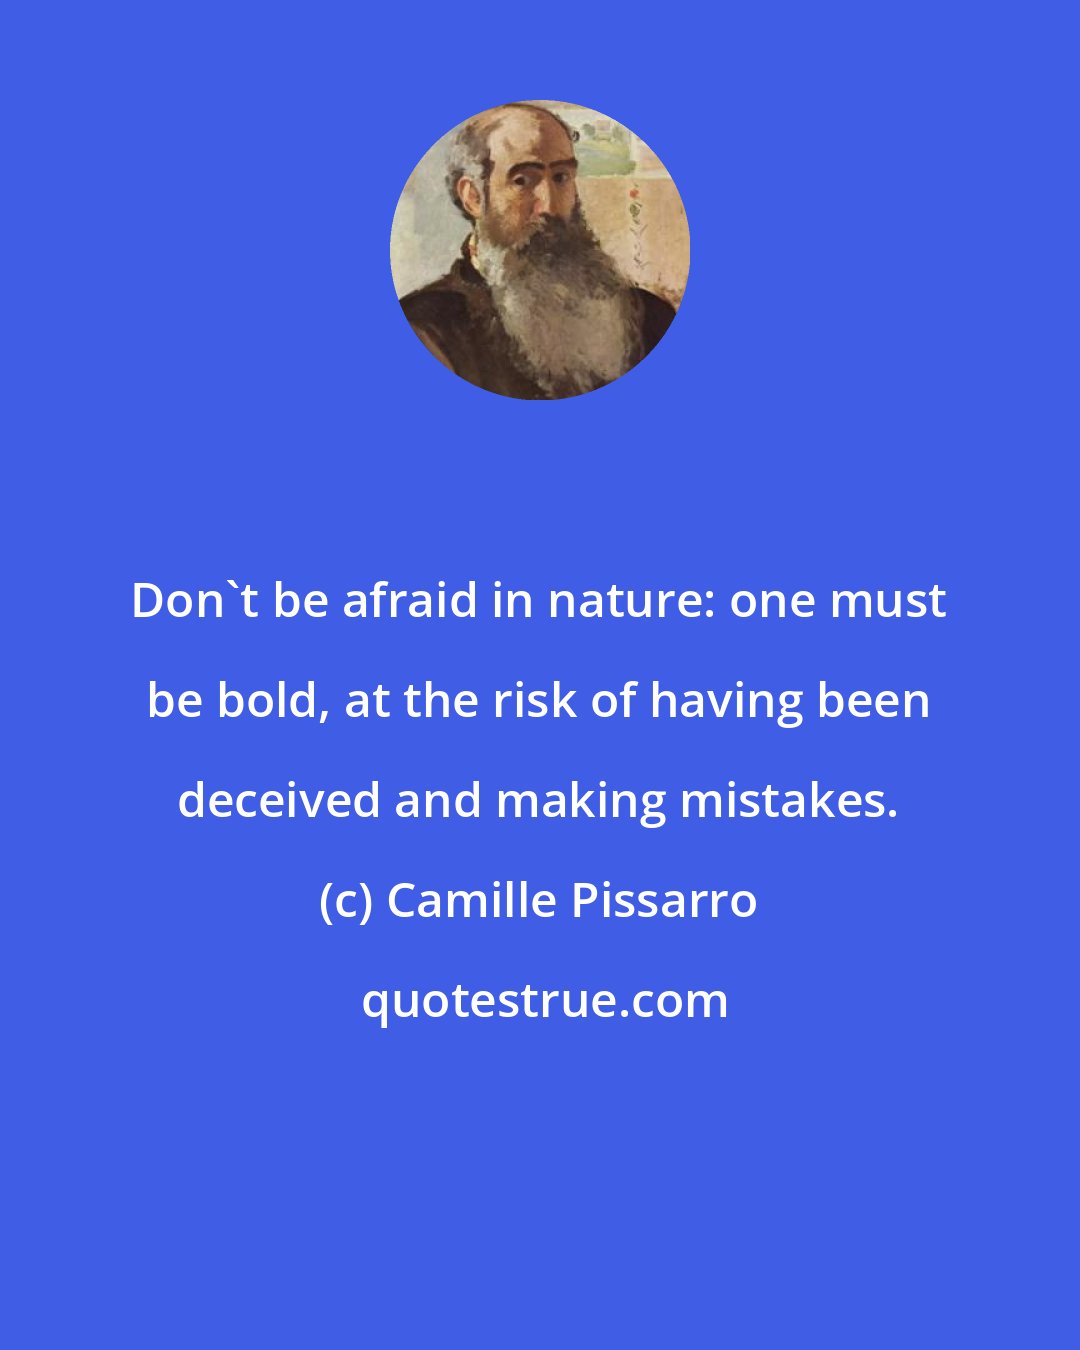 Camille Pissarro: Don't be afraid in nature: one must be bold, at the risk of having been deceived and making mistakes.